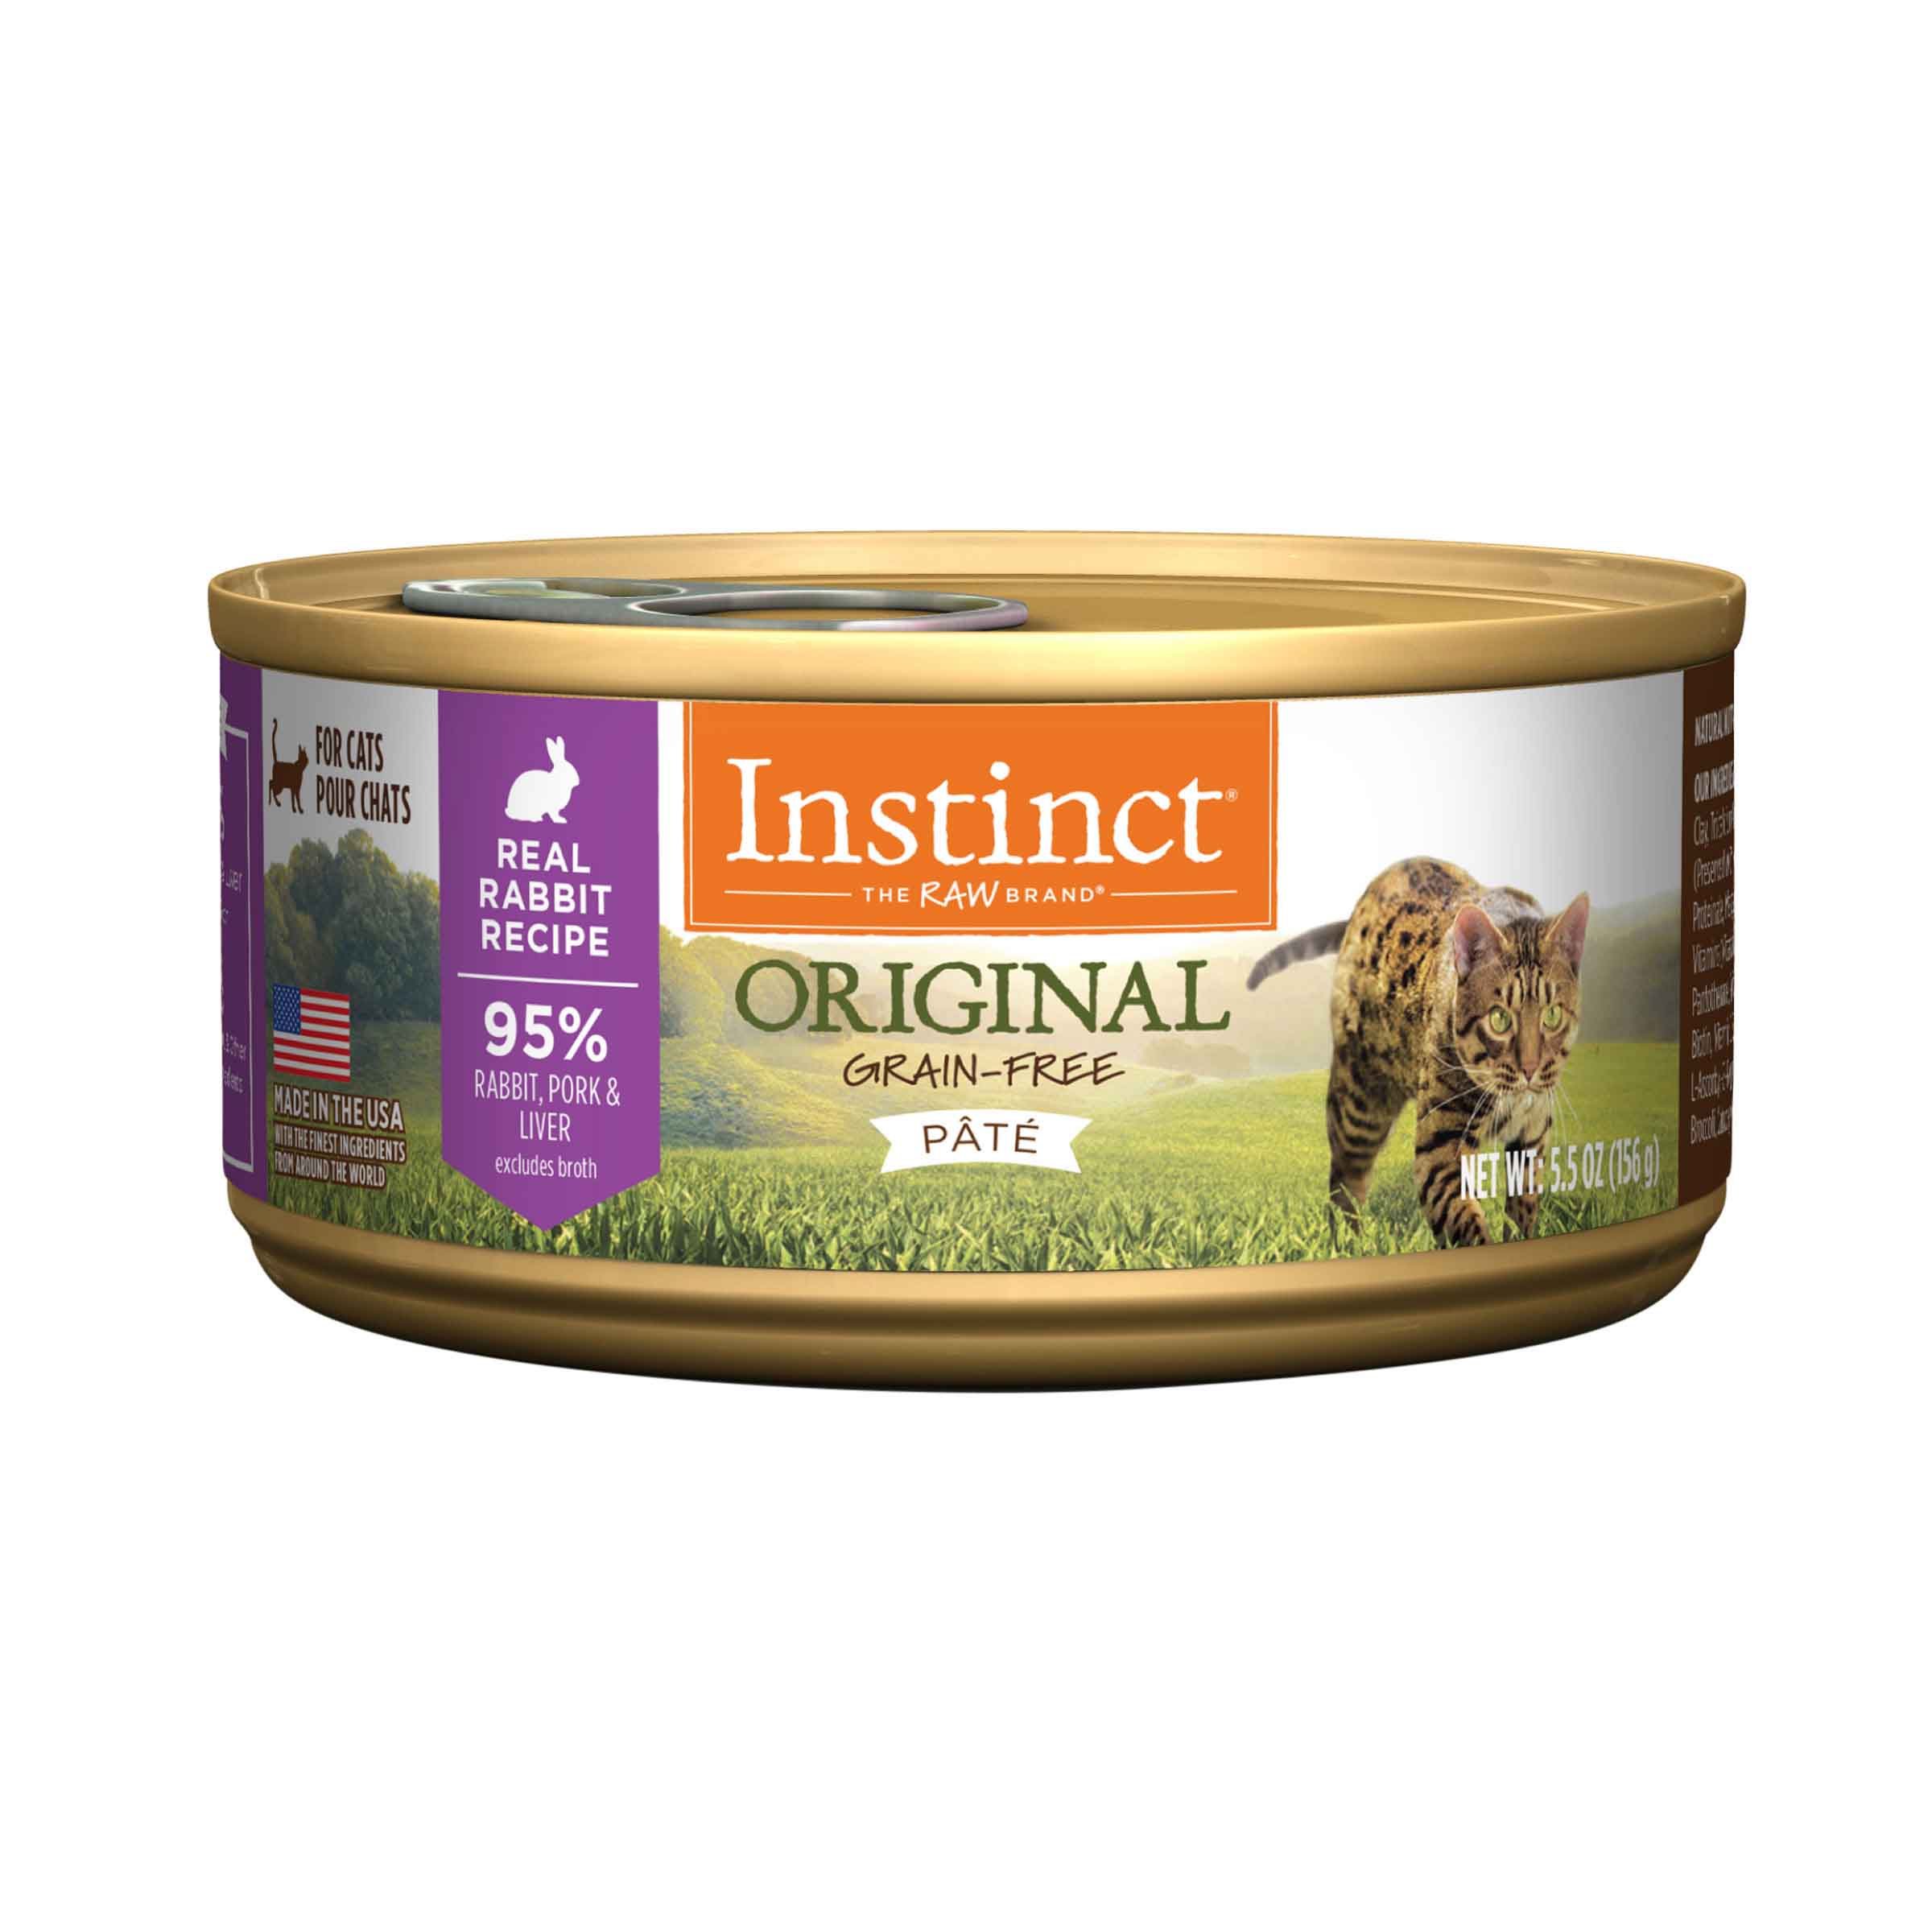 Instinct Original Grain-Free Pate Real Rabbit Recipe Canned Cat Food, 5.5 Ounce Can